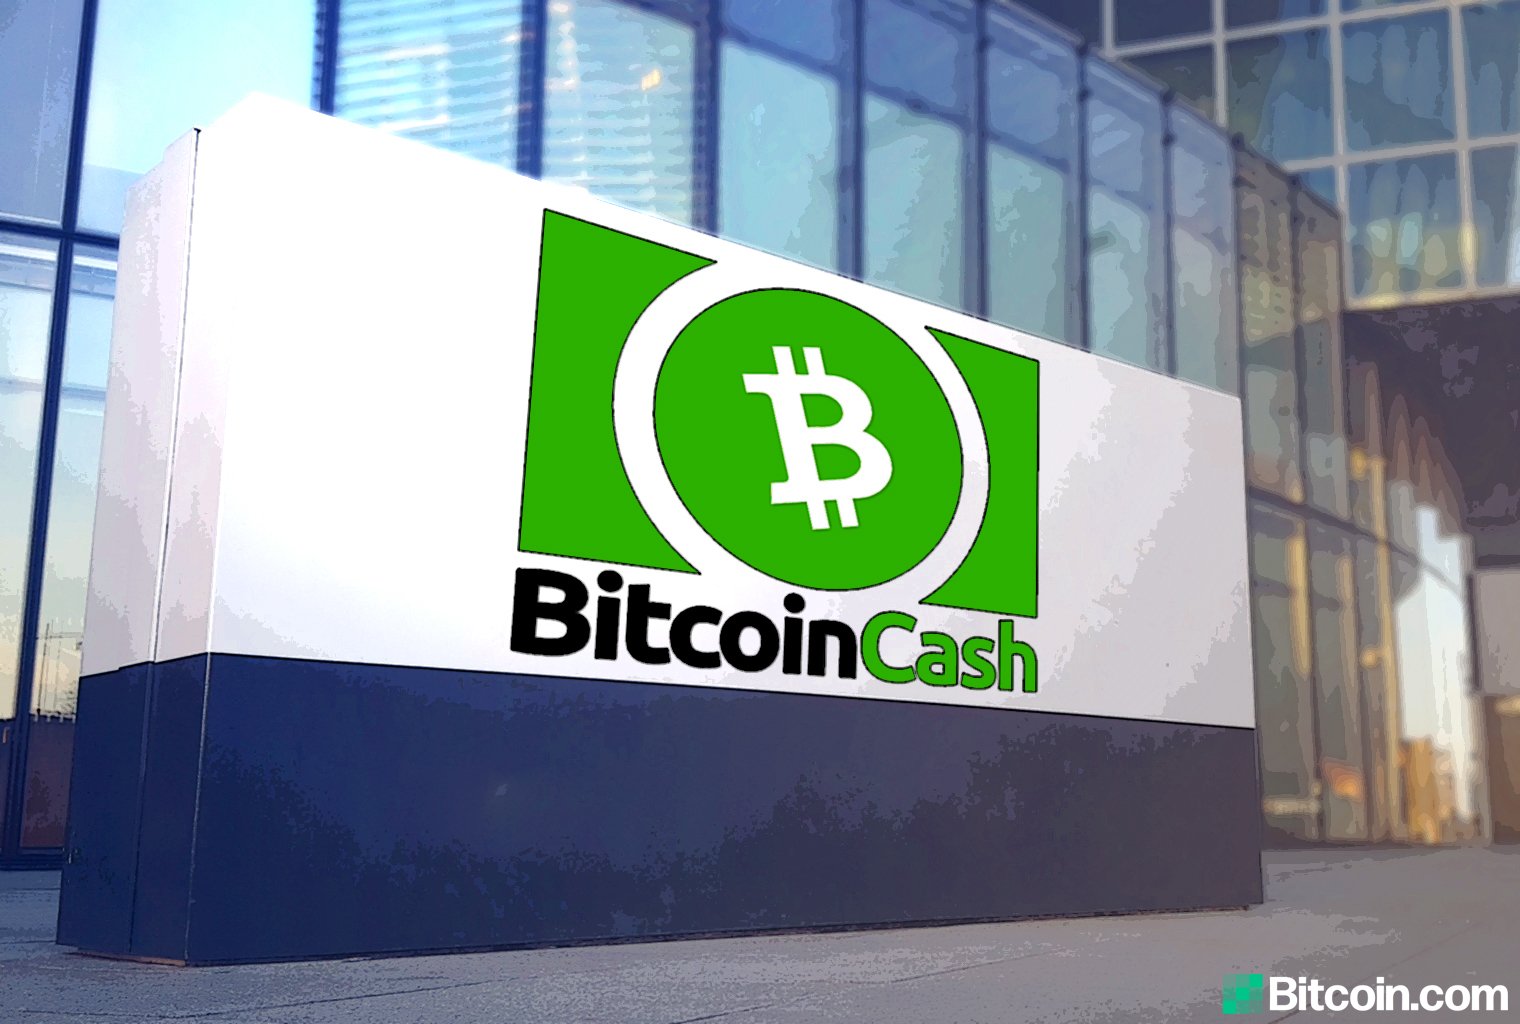 Plans to Build a $50M Bitcoin Cash Tech Park in North Queensland Revealed